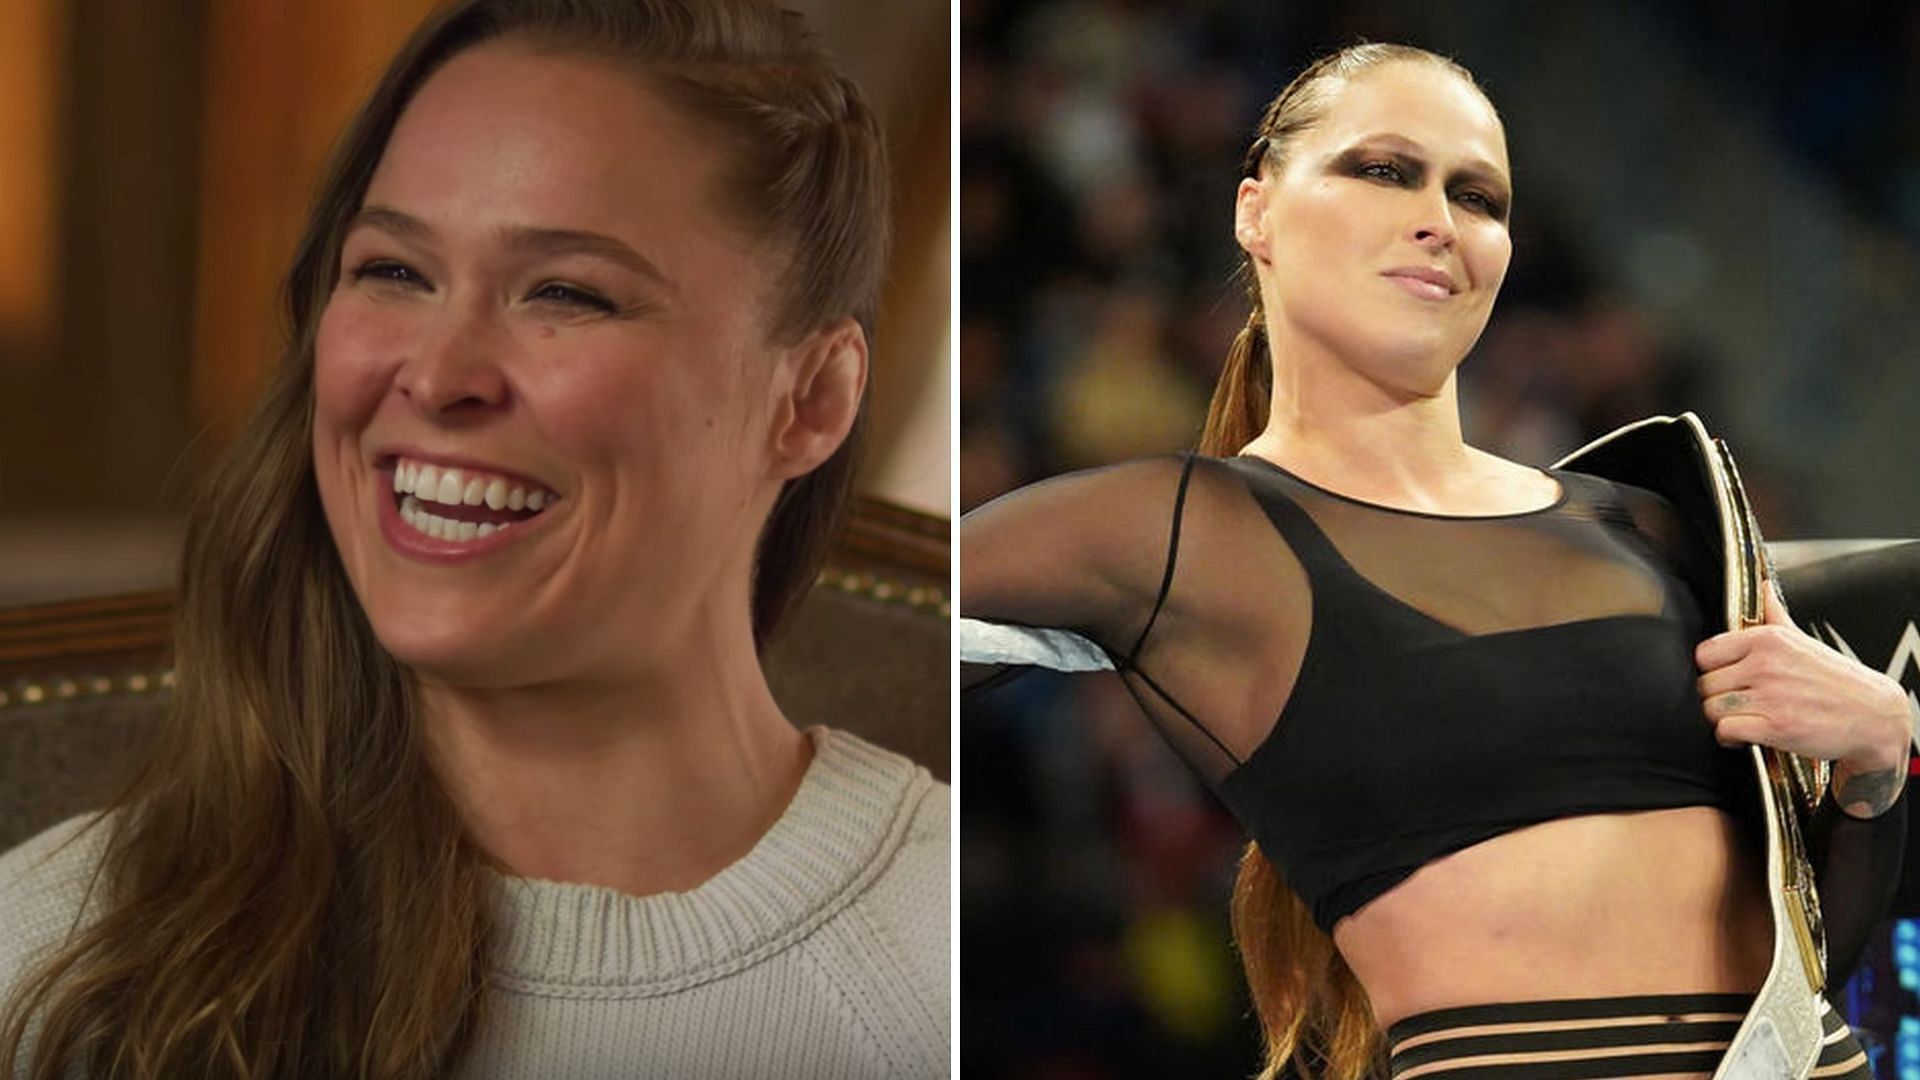 Ronda Rousey is currently a Women